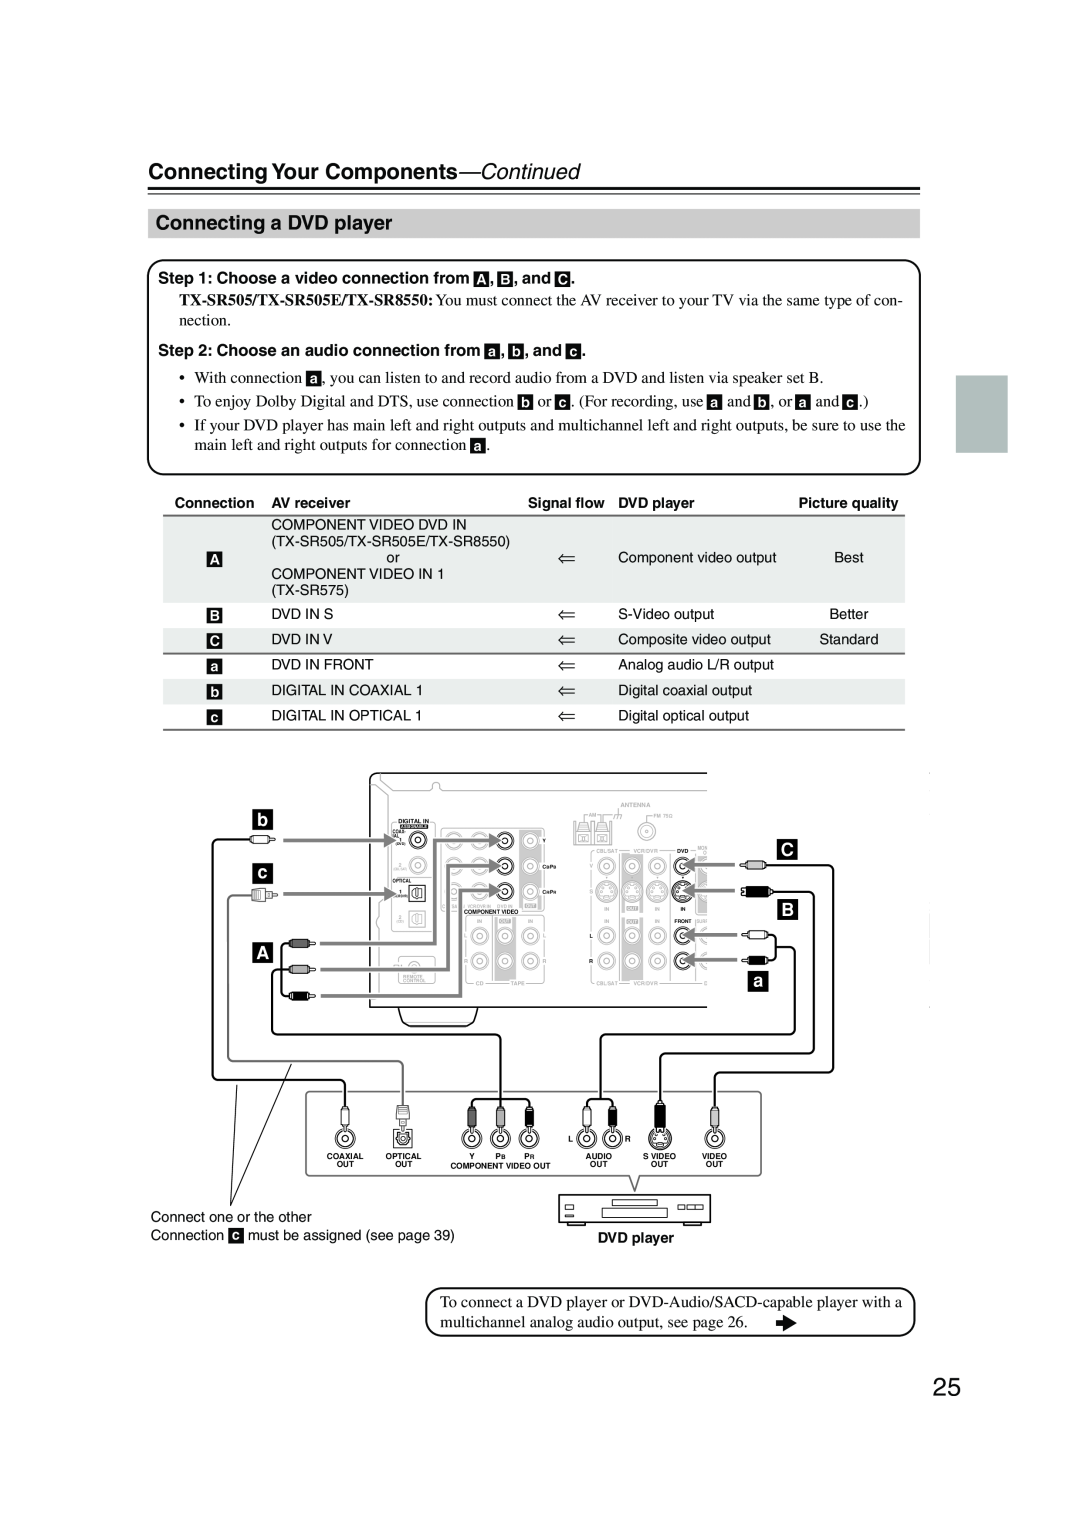 Onkyo SR575, TX-SR8550, TX-SR505E instruction manual Connecting a DVD player, Connecting Your Components-Continued, b c A 